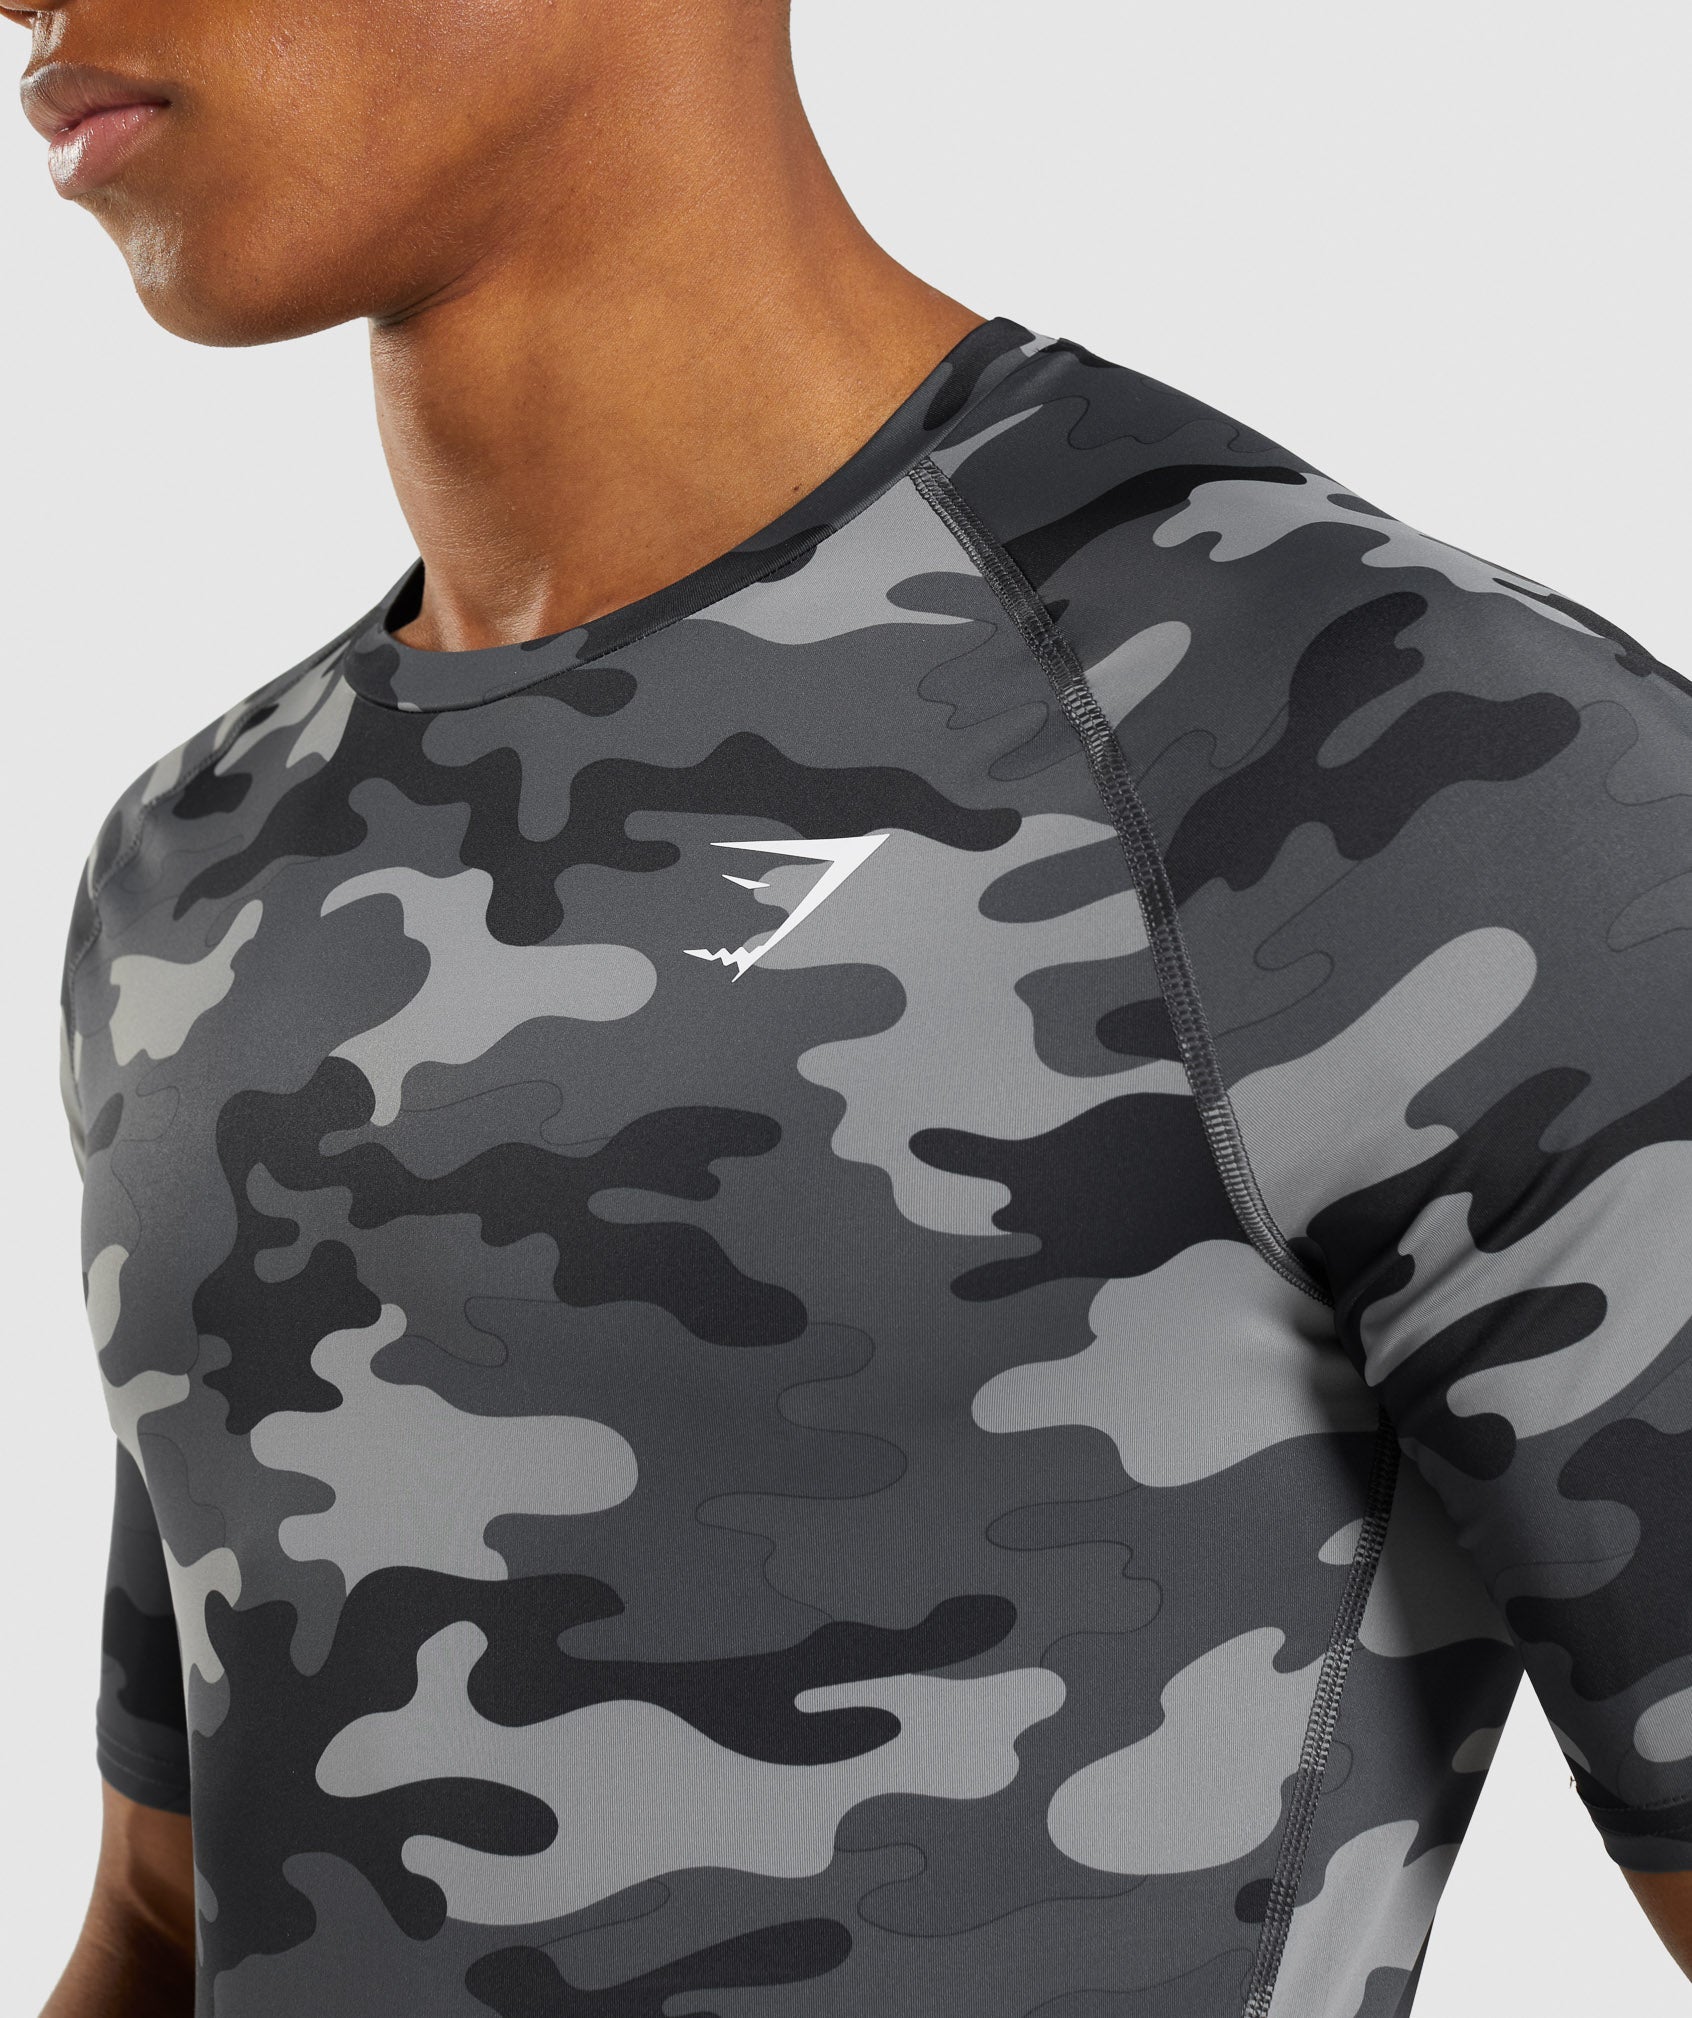 Element Baselayer T-Shirt in Camo Grey Print - view 7